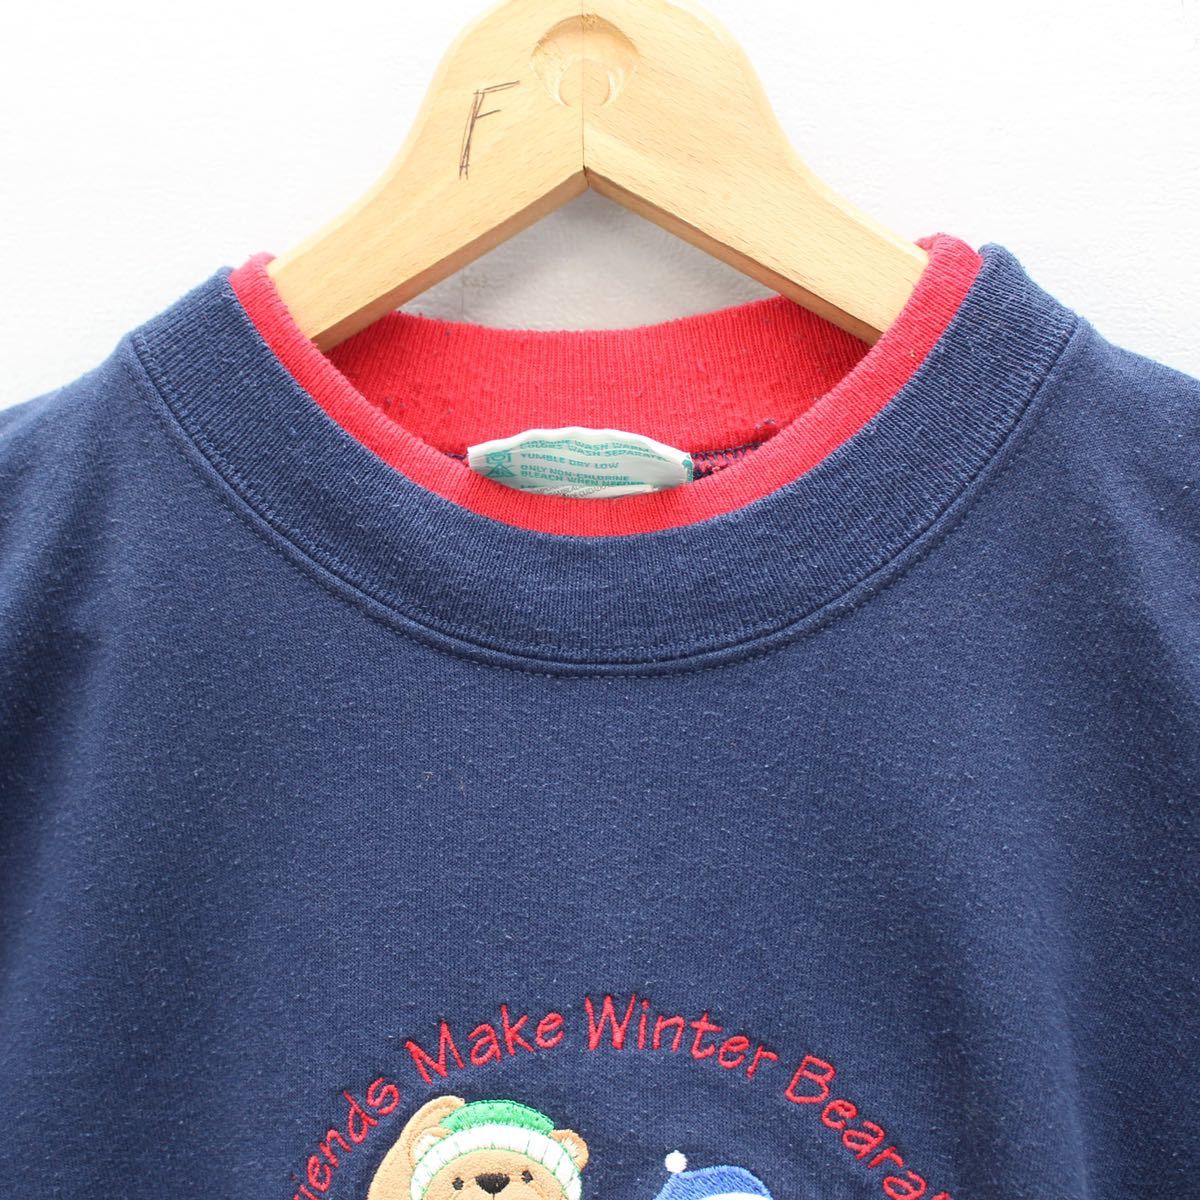 USA VINTAGE BEARS EMBROIDERY DESIGN SWEAT SHIRT/アメリカ古着くま刺繍デザインスウェット_画像6